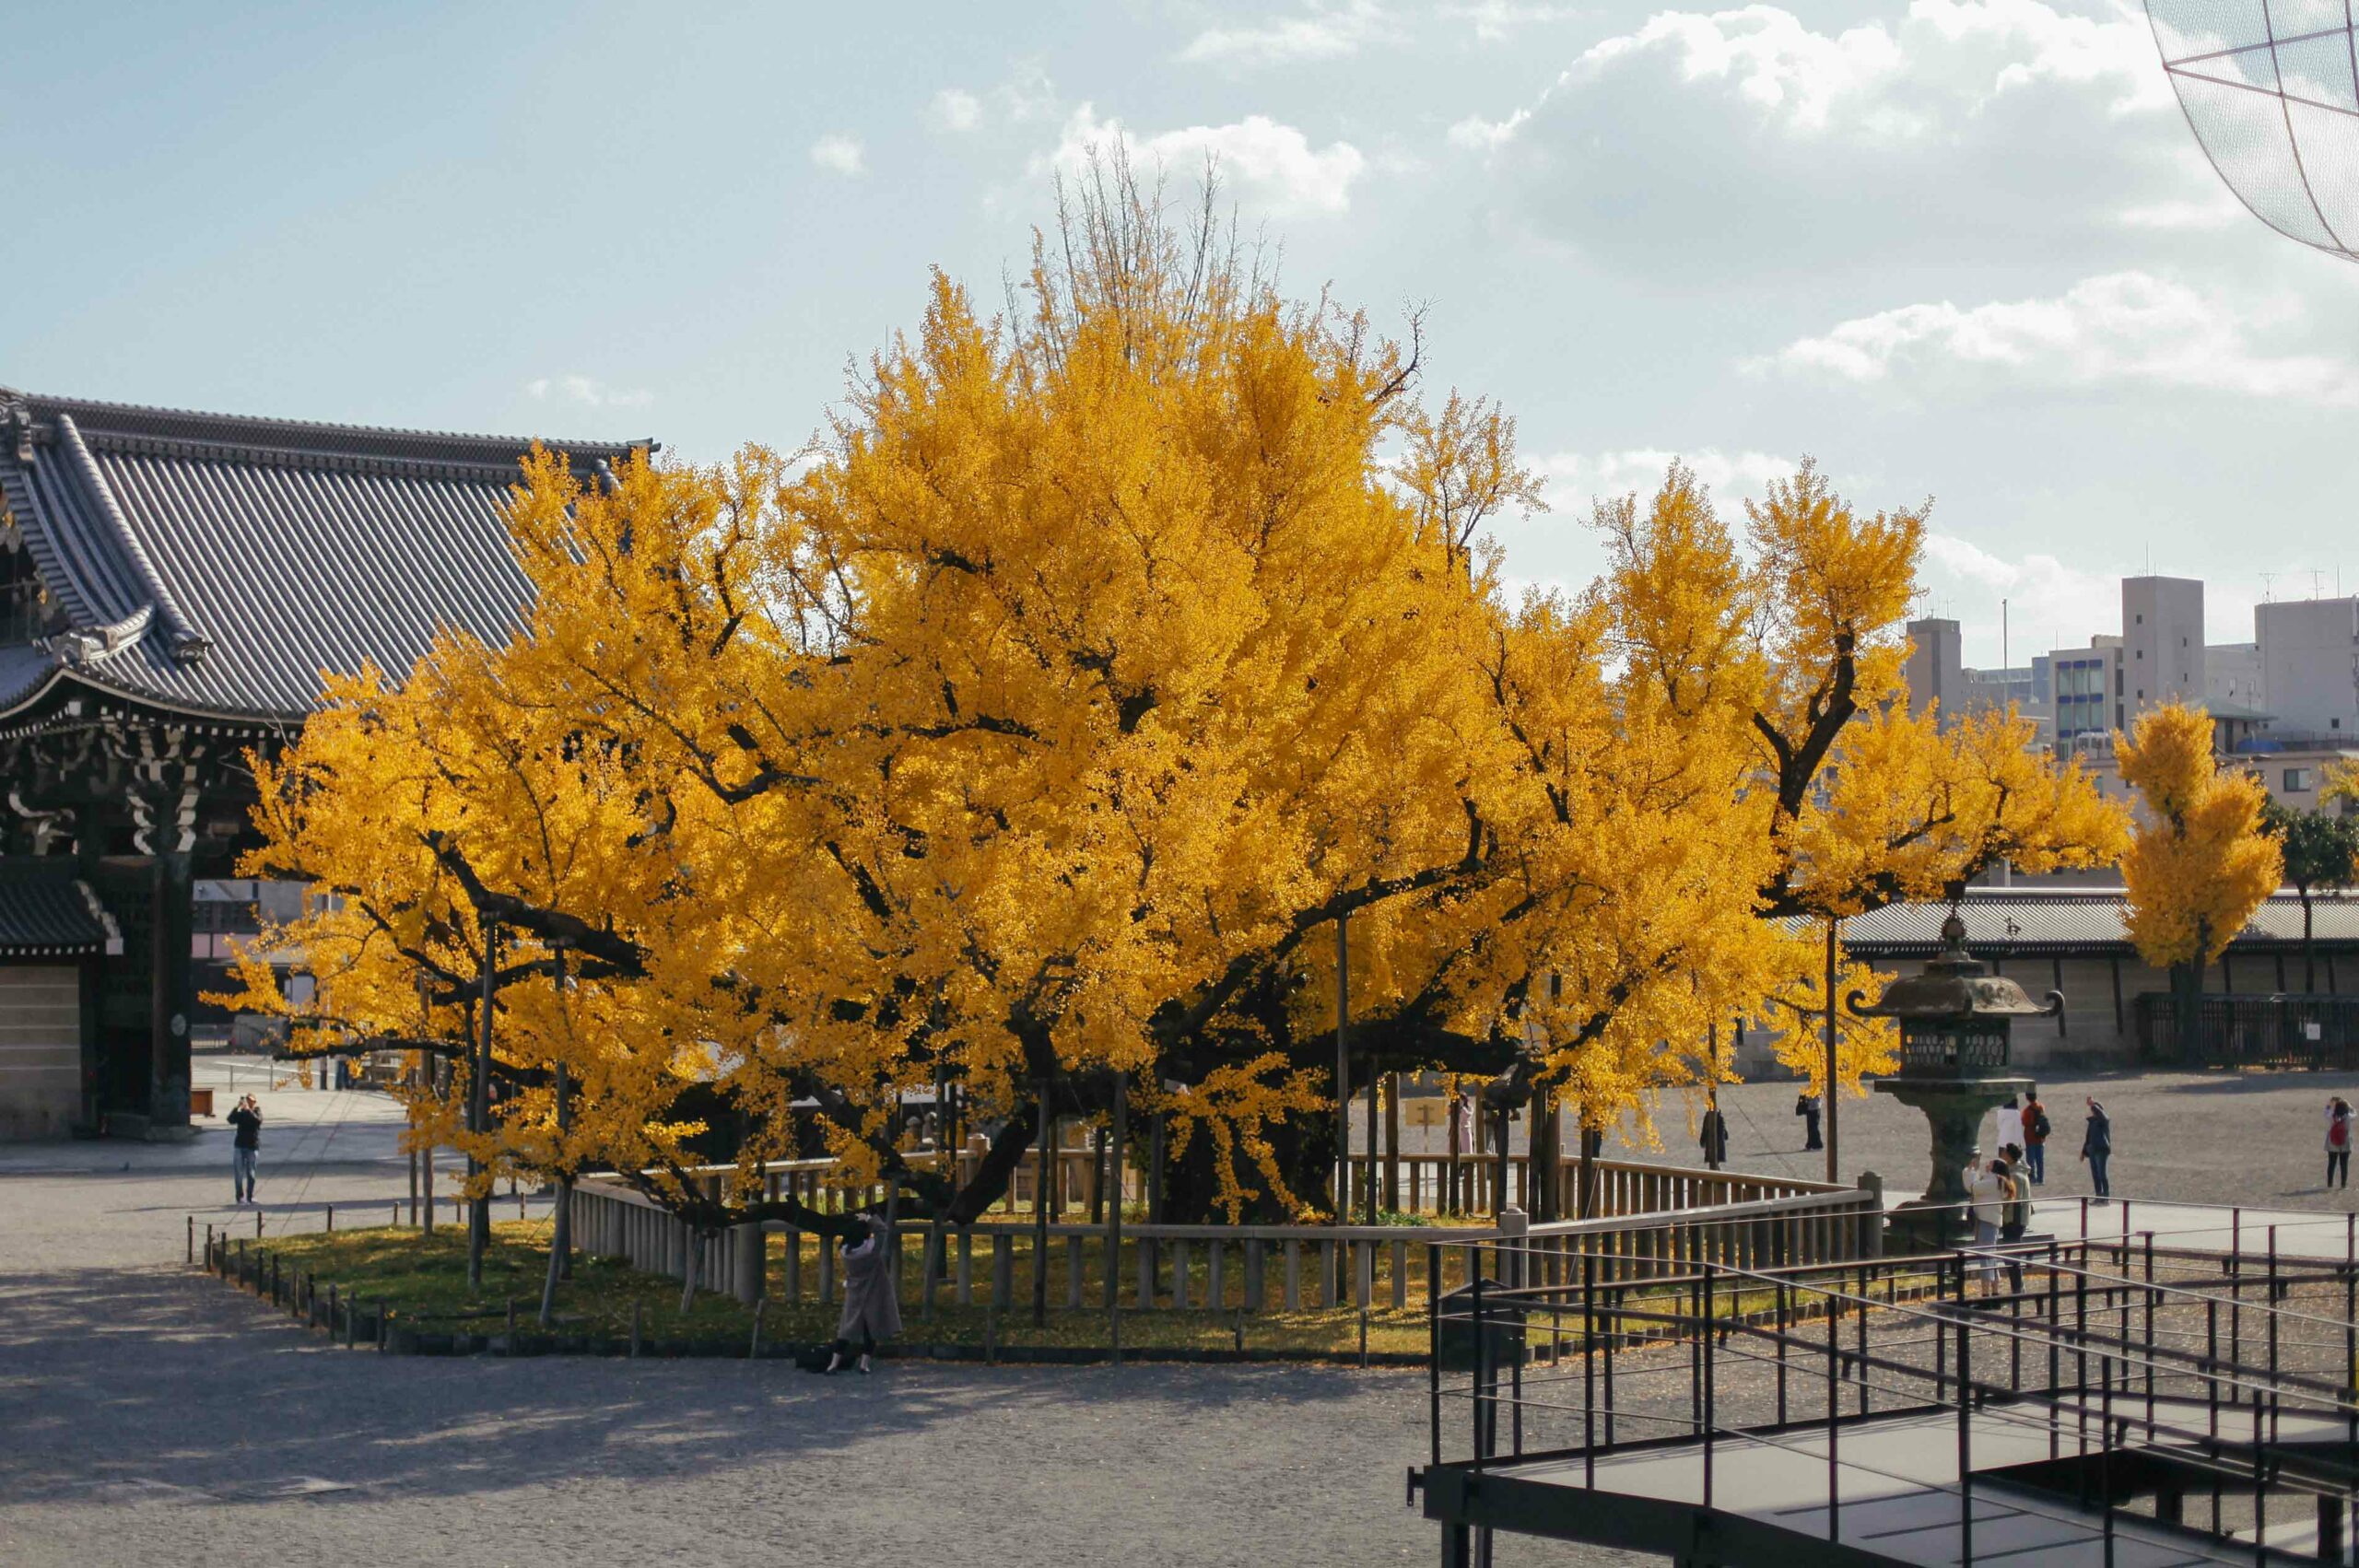 The temple's golden ginkgo tree will be at the peak of its autumn colour in the first week of December, depending on the year's weather.